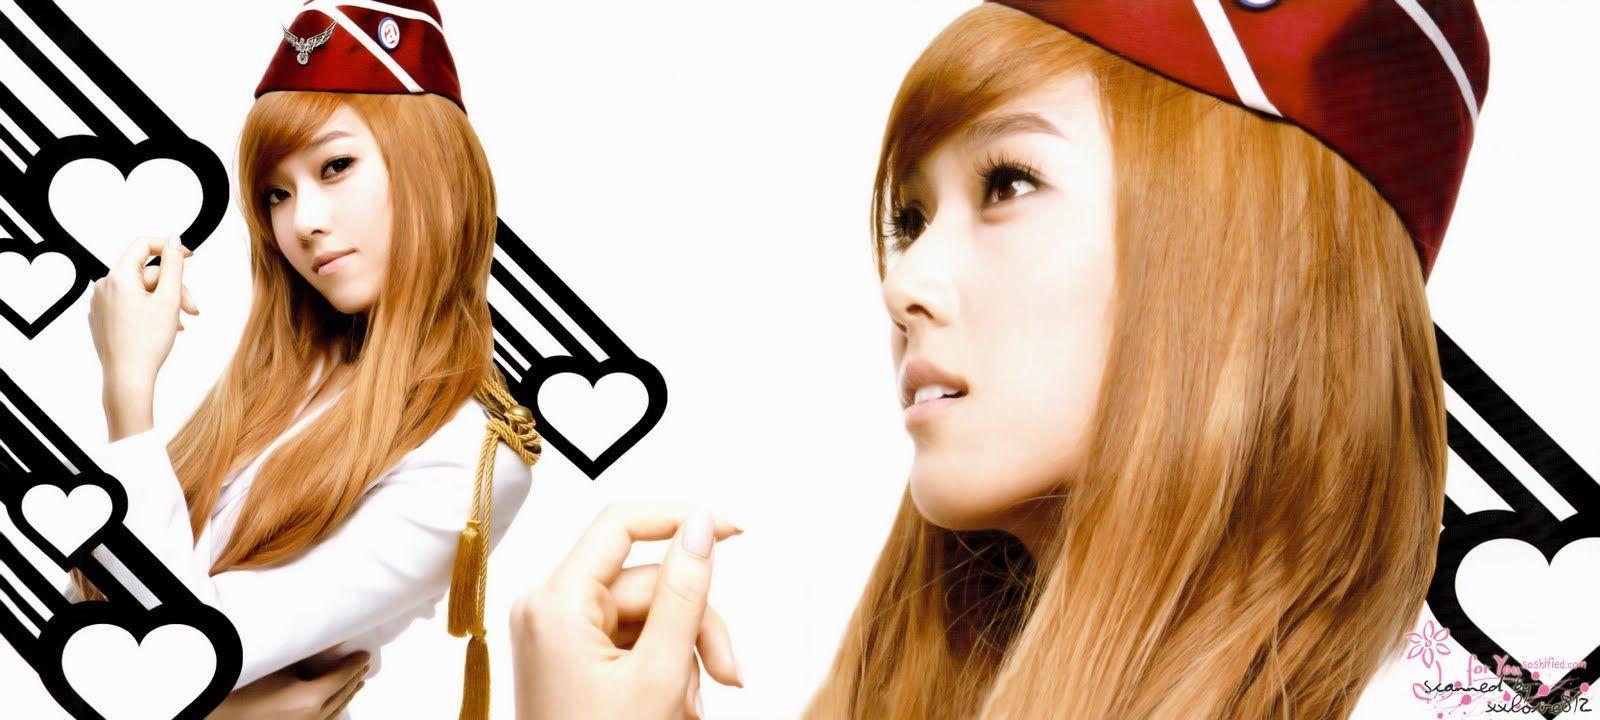 Jessica Snsd Backgrounds Wallpaper Cave